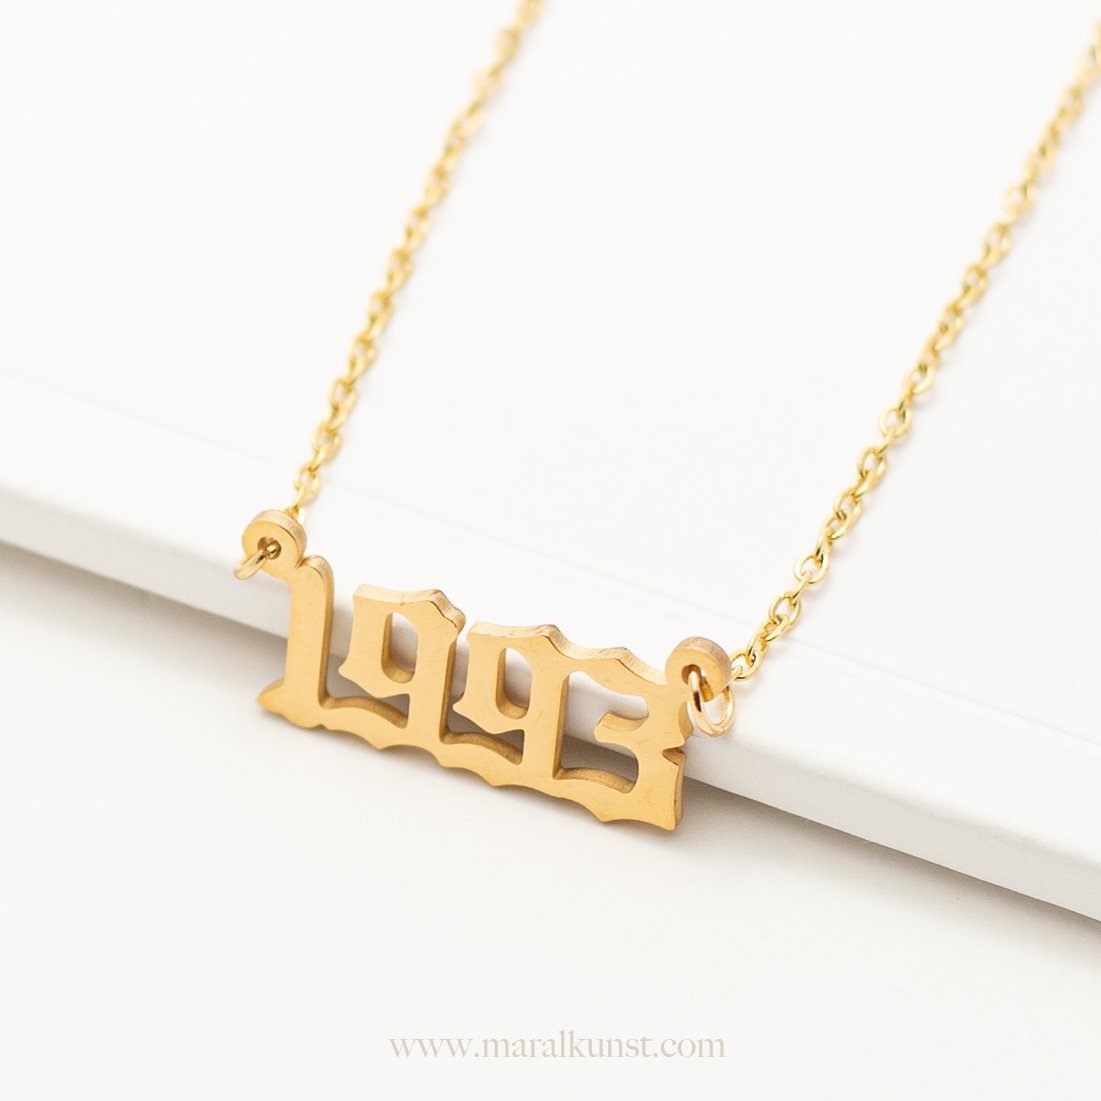 1993 Calligraphy Necklace in 14K Gold - Maral Kunst Jewelry